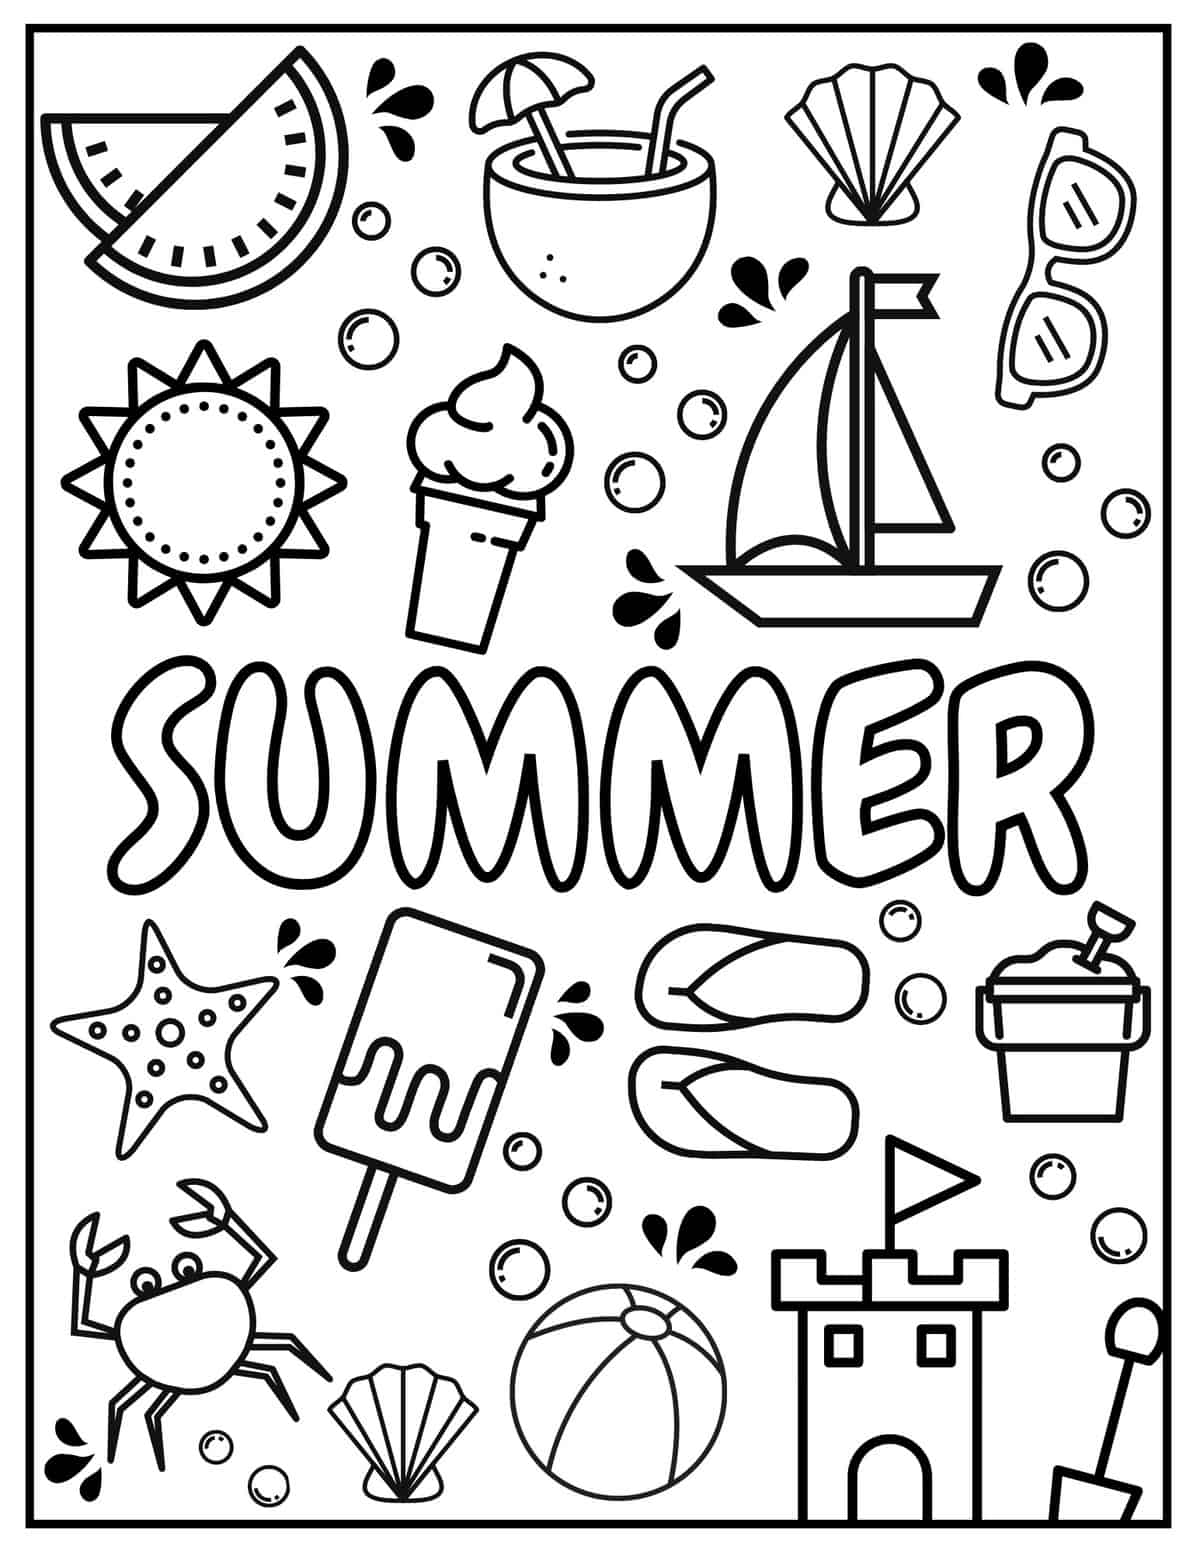 summer coloring page with various summer designs such as flip flops, sailboat, shells, fun